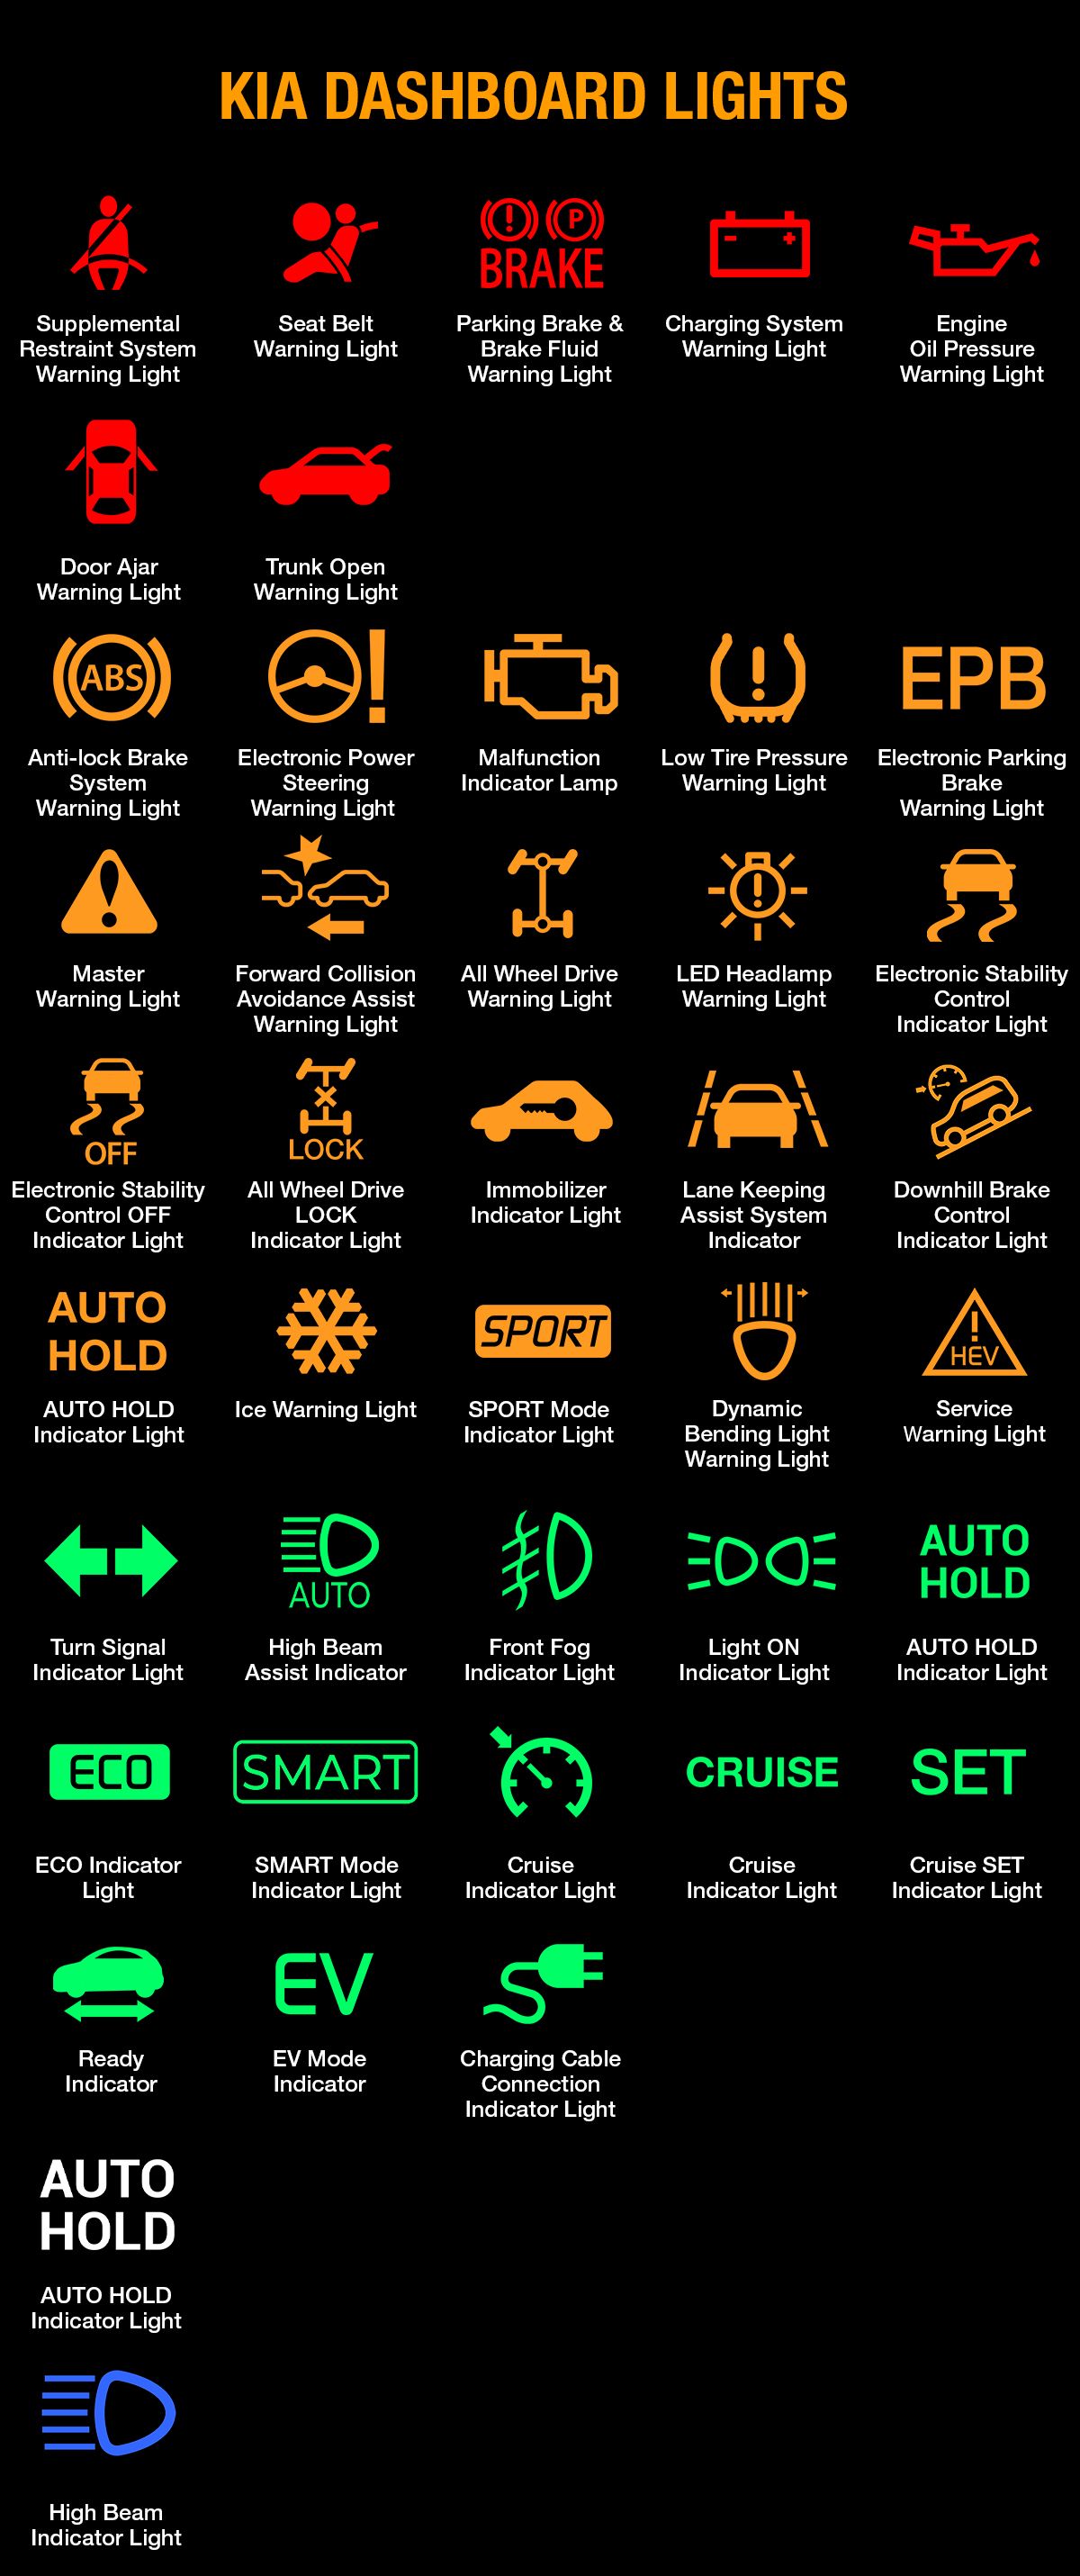 KIA Warning Light Symbols and Meanings (FULL List, FREE Download)